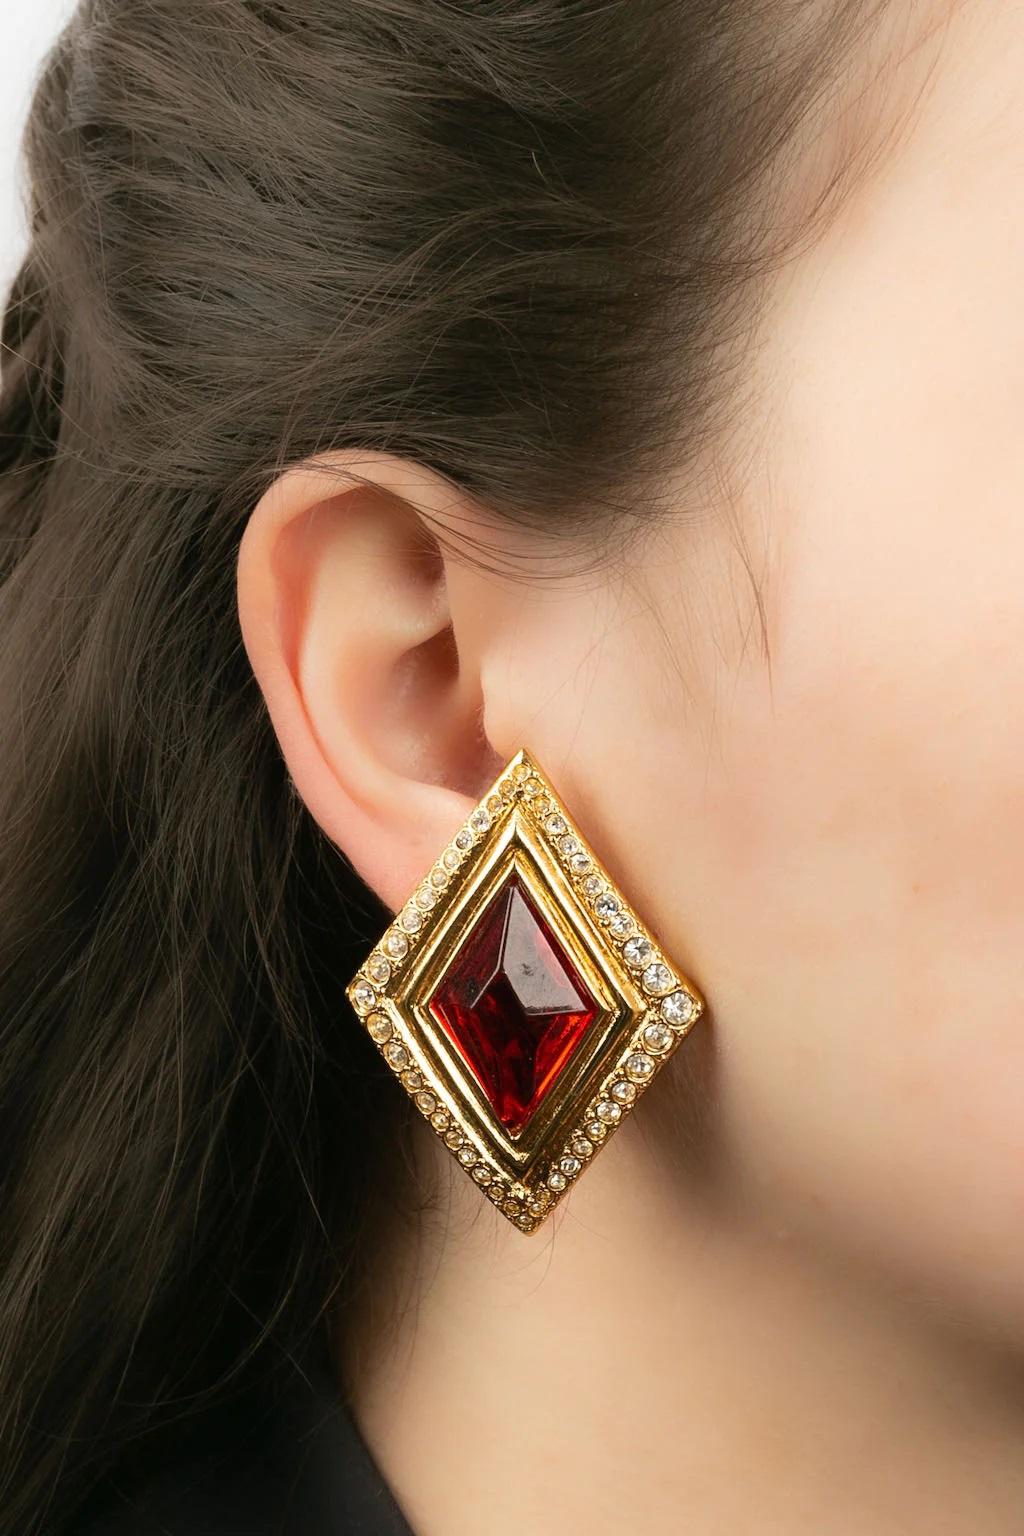 Jean-louis Scherrer - Gold-plated metal clip earrings with rhinestones and a red resin cabochon.

Additional information:
Dimensions: 3.8 W x 5.2 H cm
Condition: Very good condition
Seller Ref number: BO11